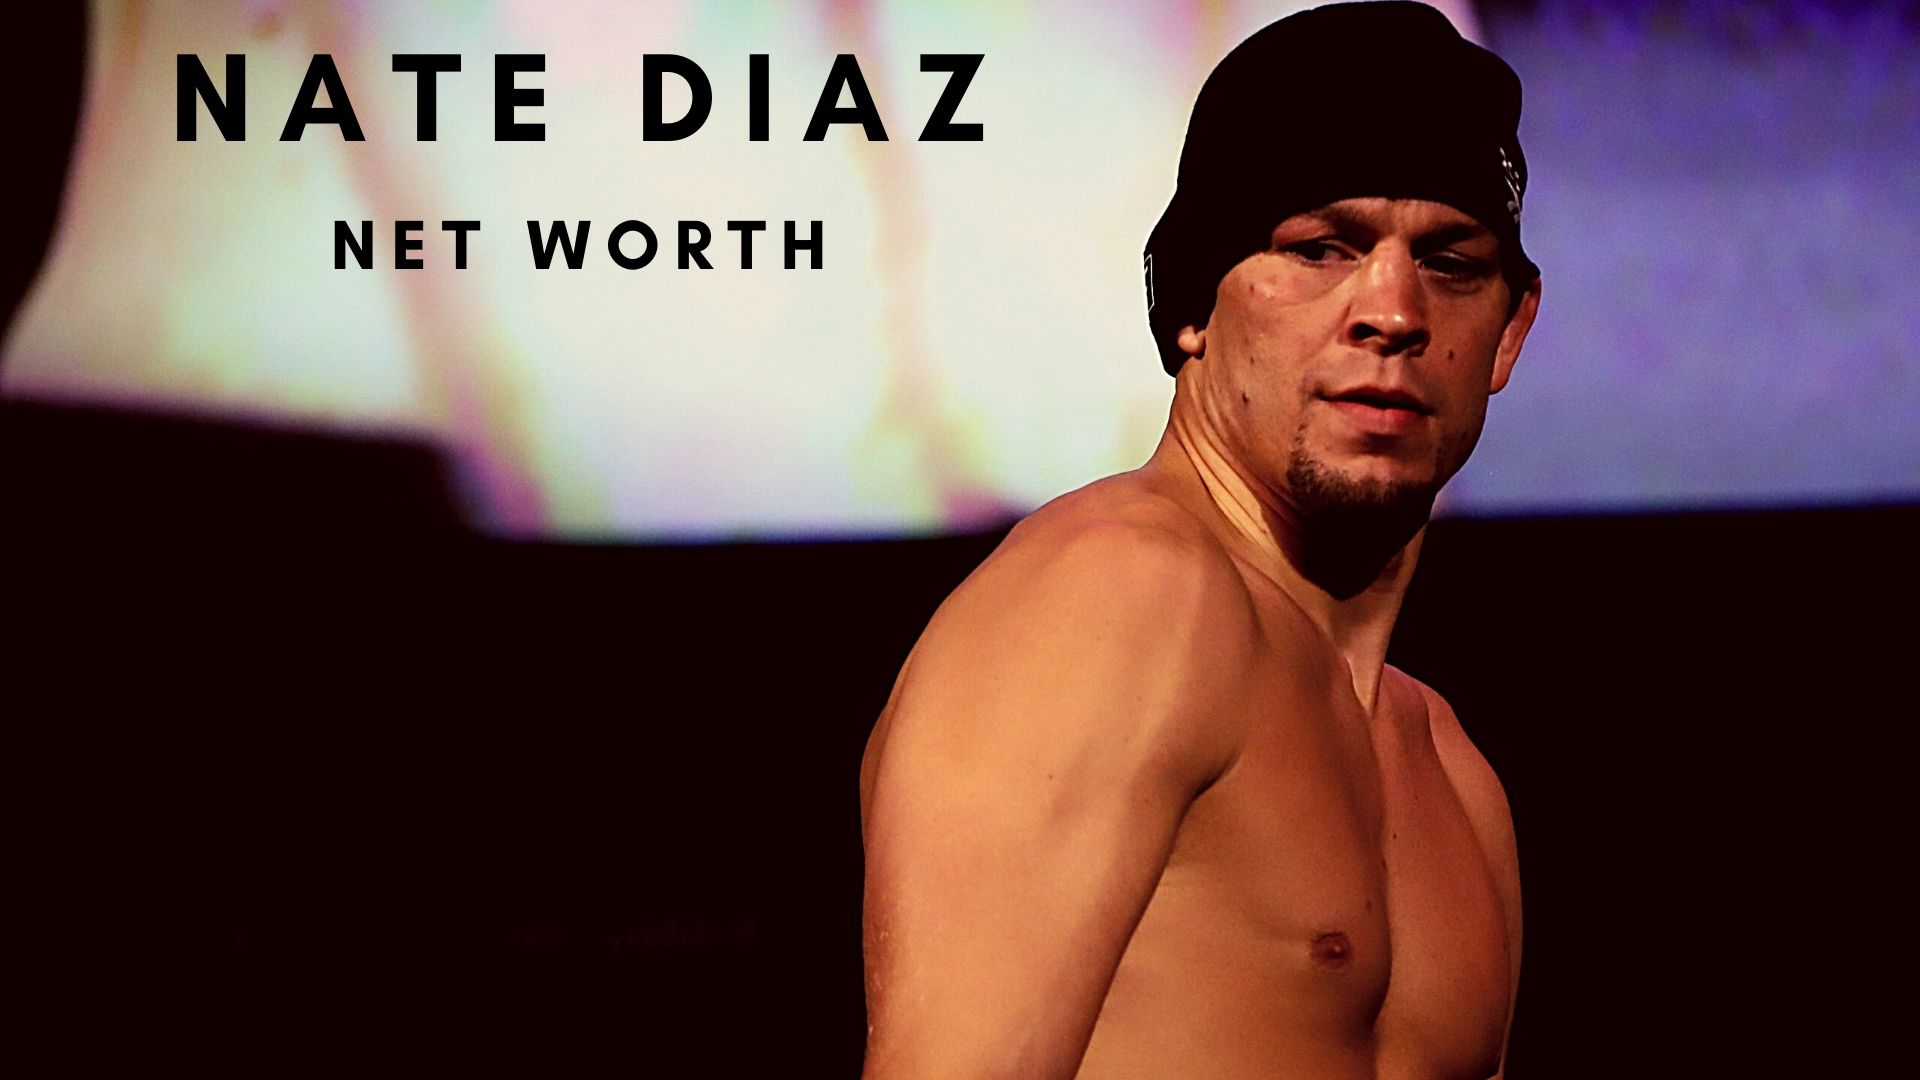 Nate Diaz is one of the biggest names in the UFC and has amassed a huge net...